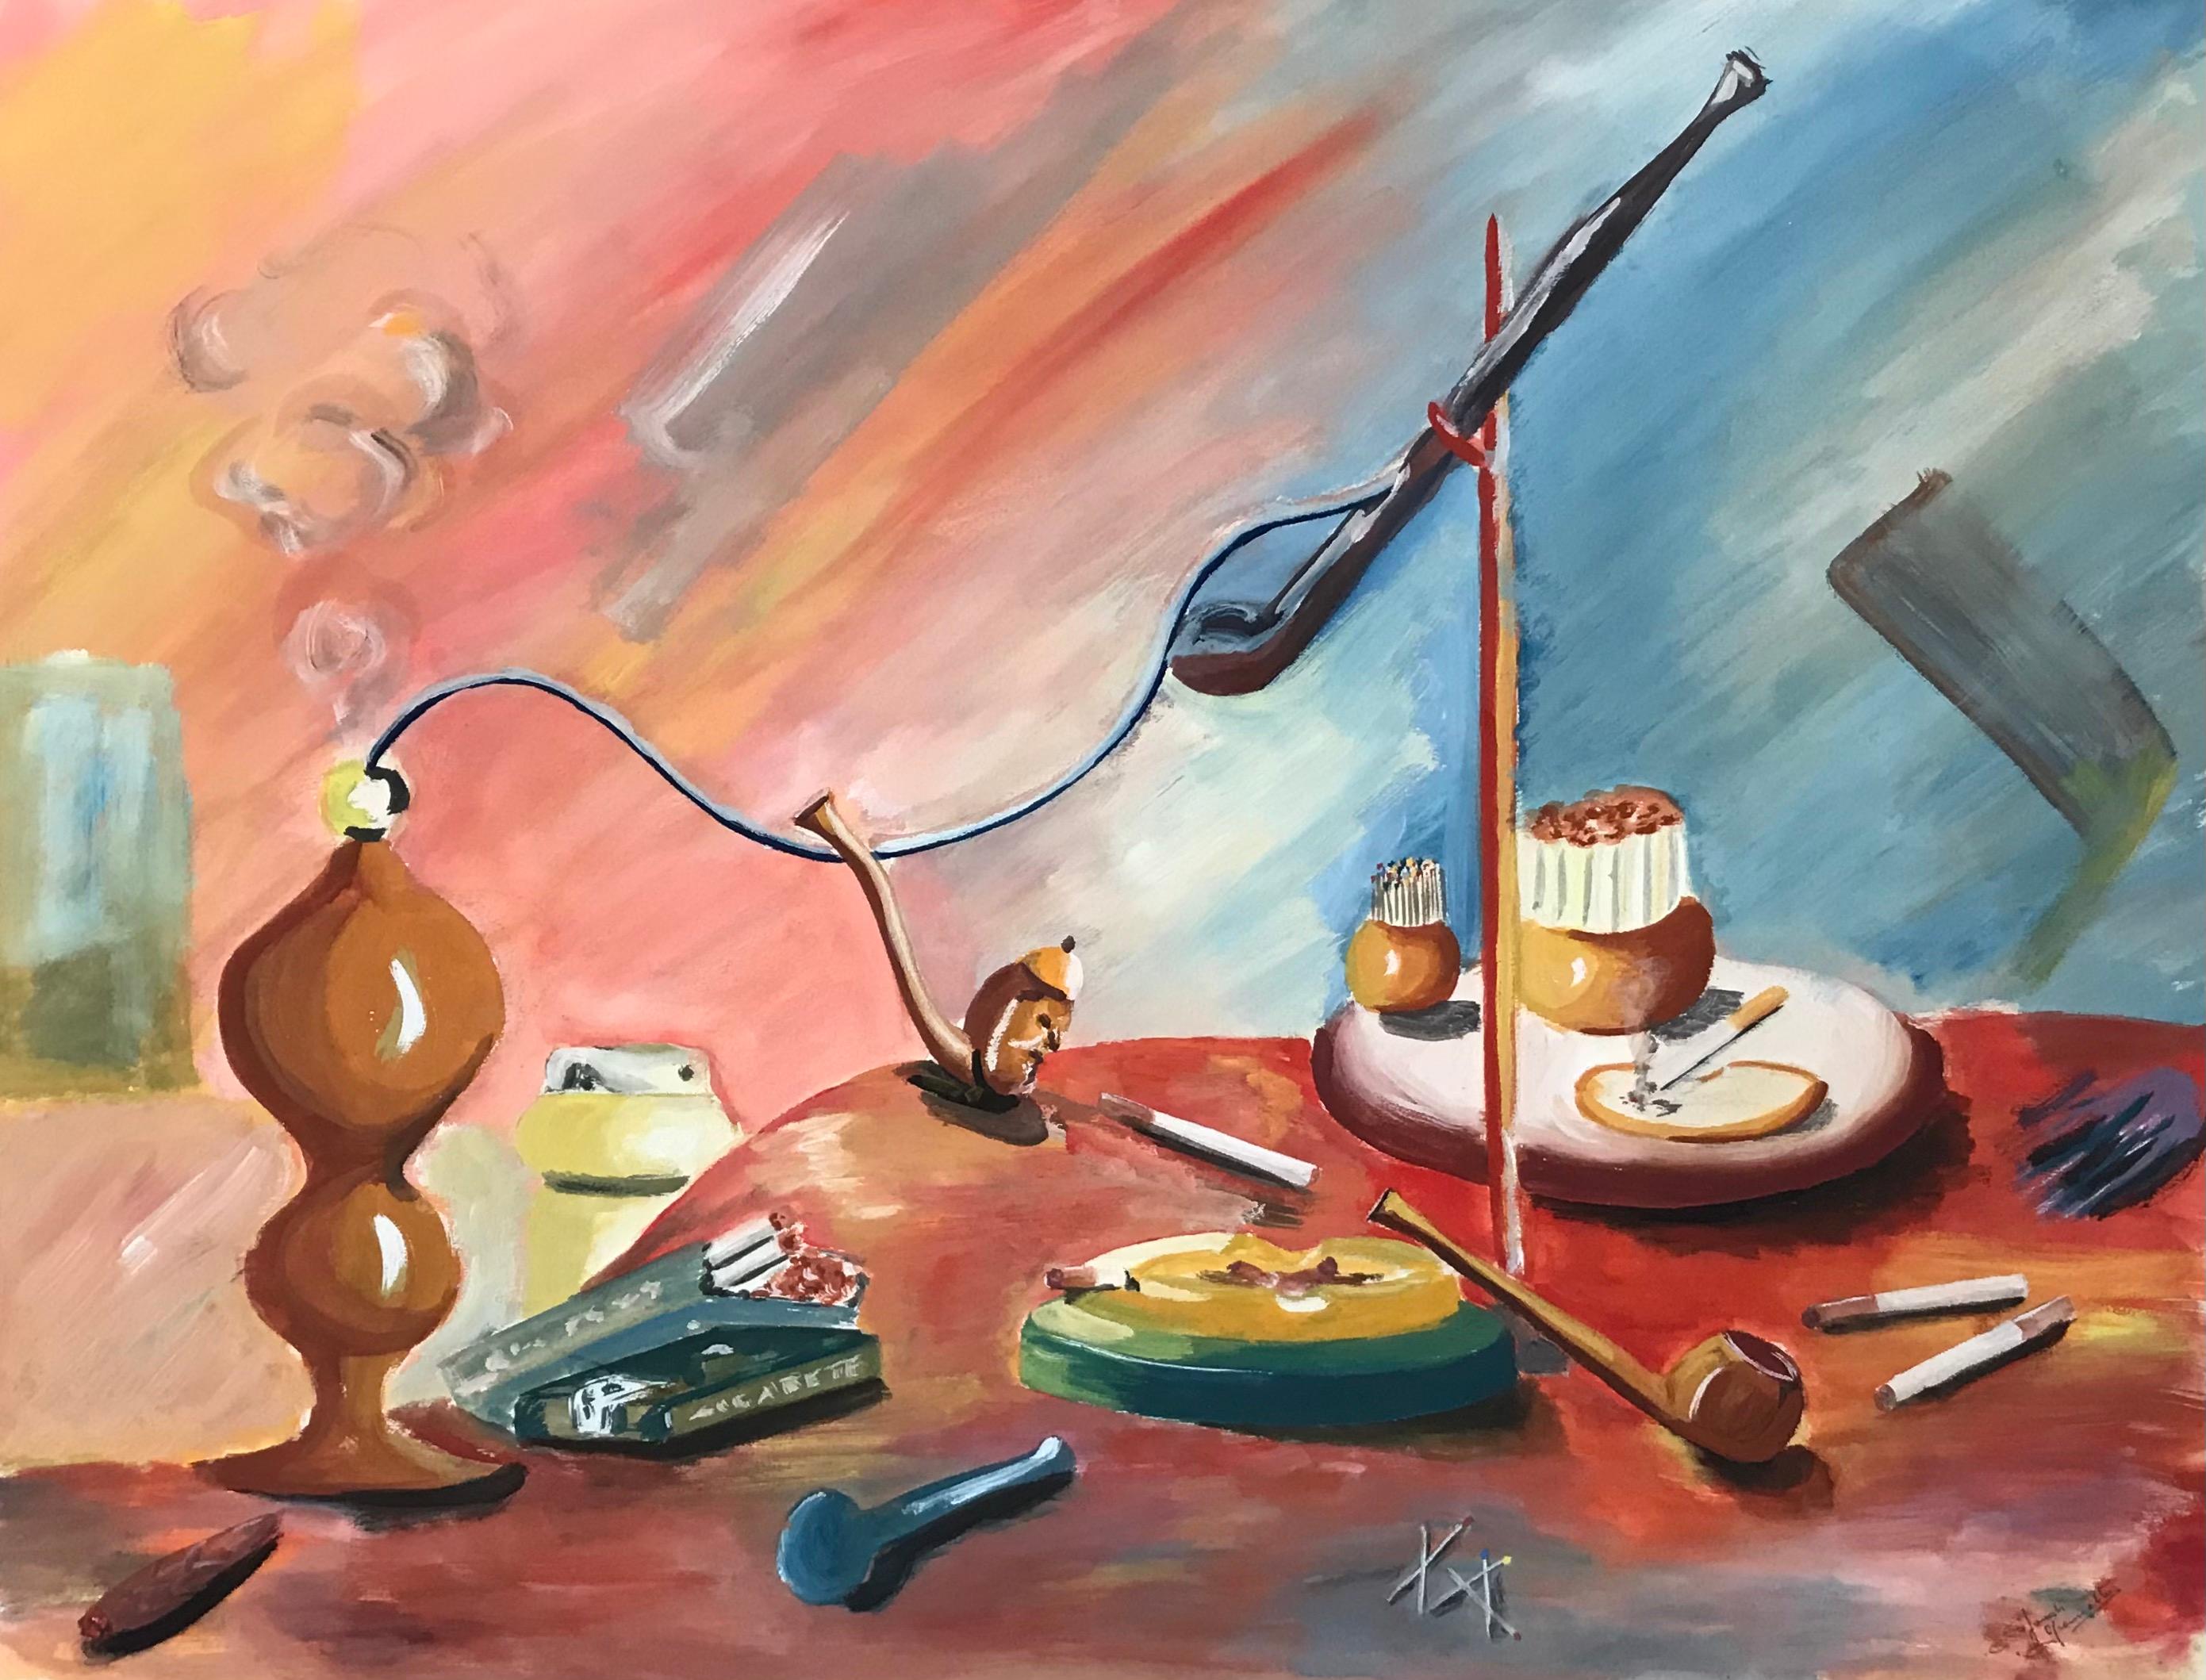 Hookah, pipes and cigarettes by Giametta - Gouache on cardboard 47x62 cm